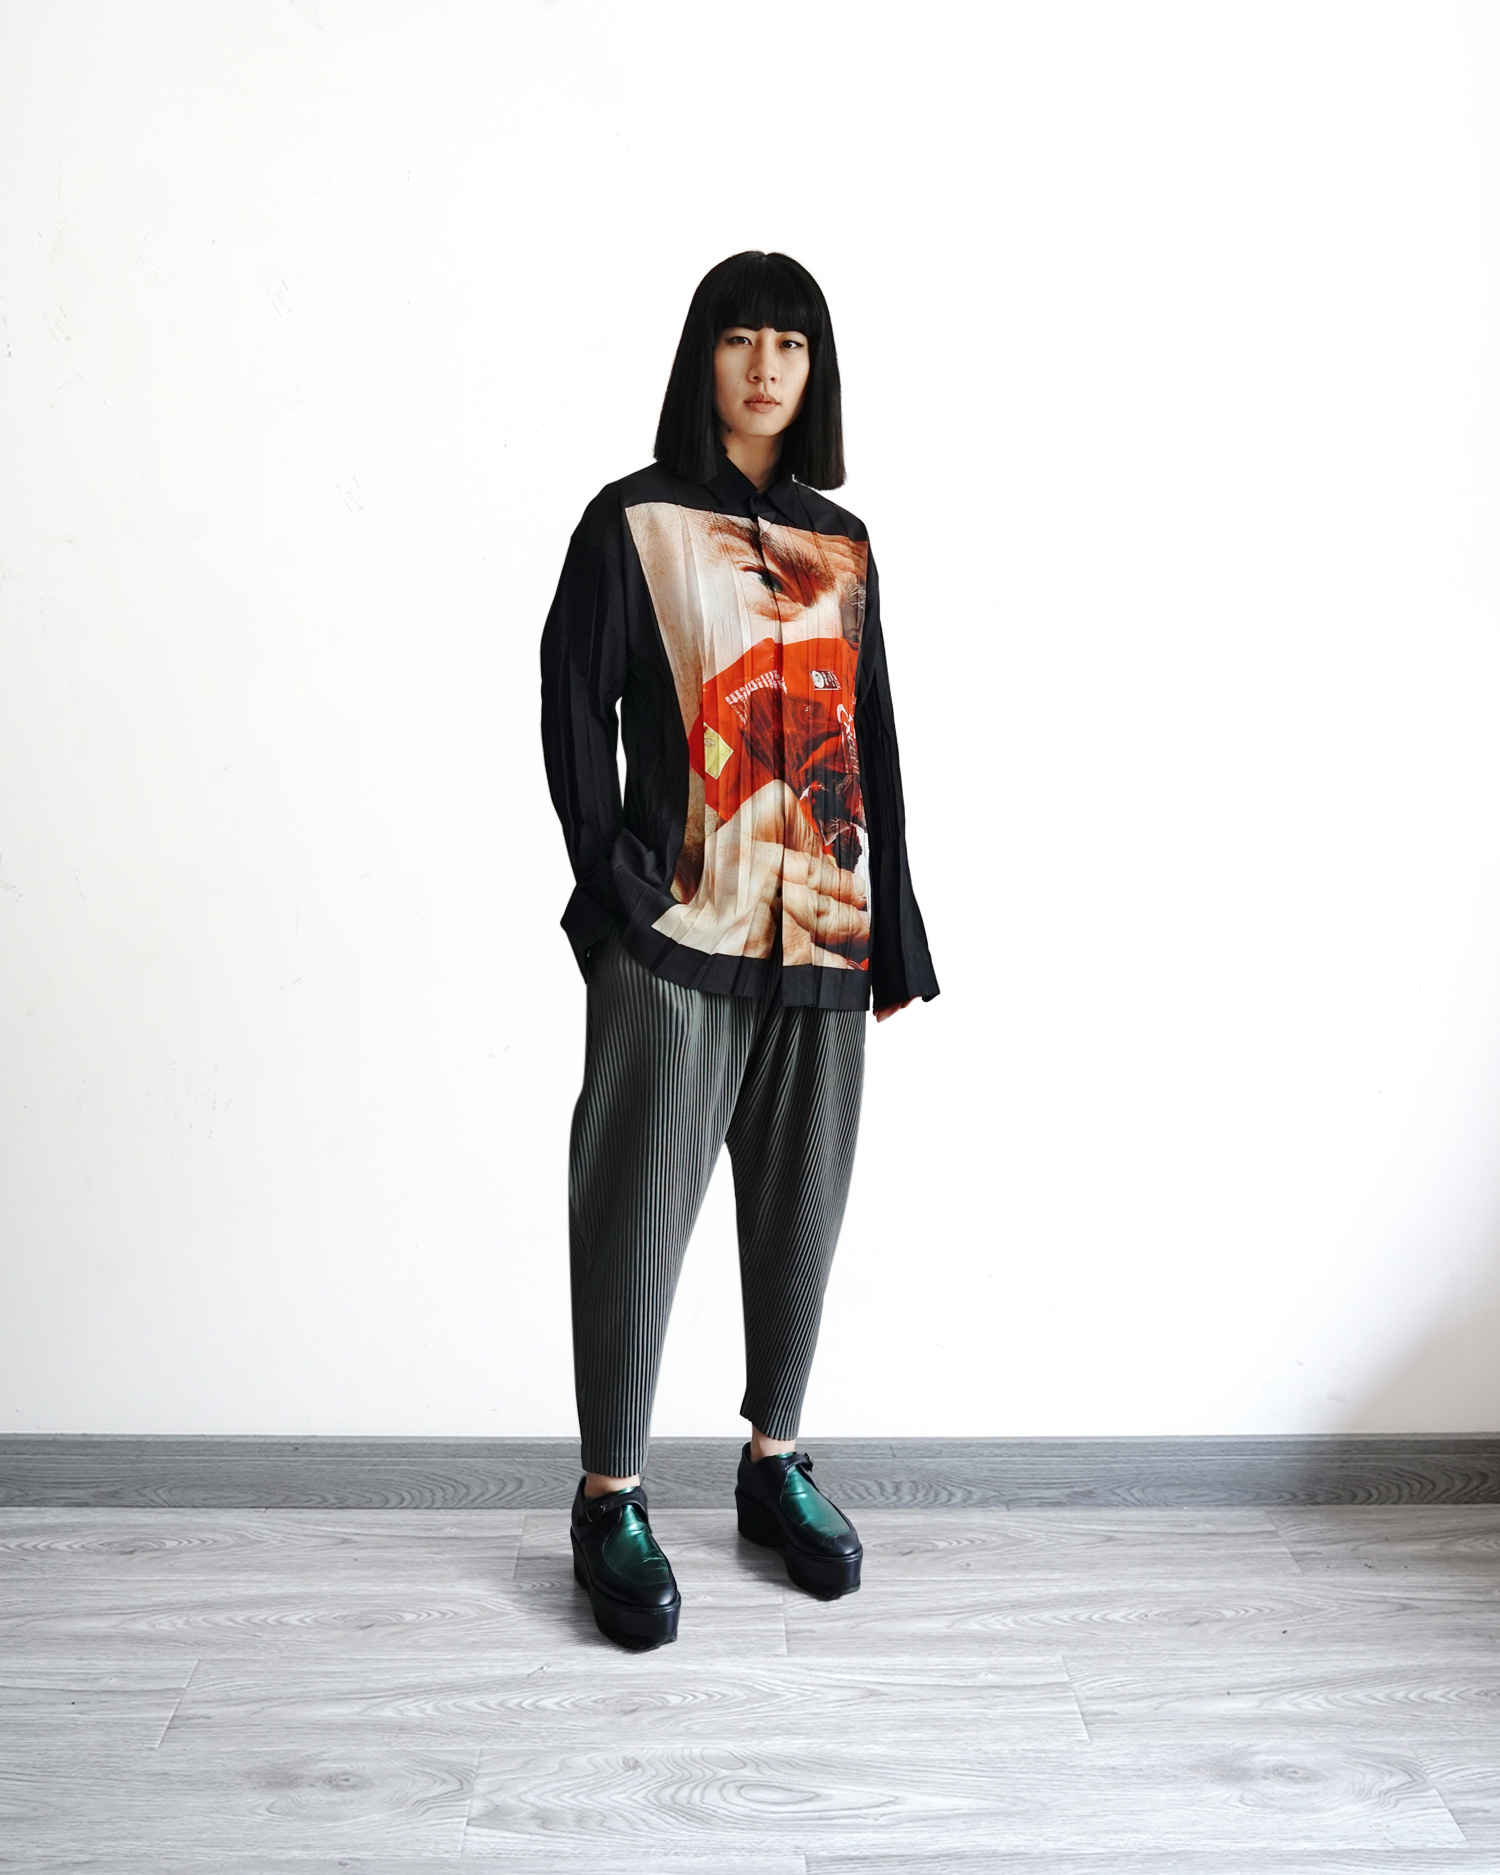 A Look Into Modern Issey Miyake – The Rosenrot